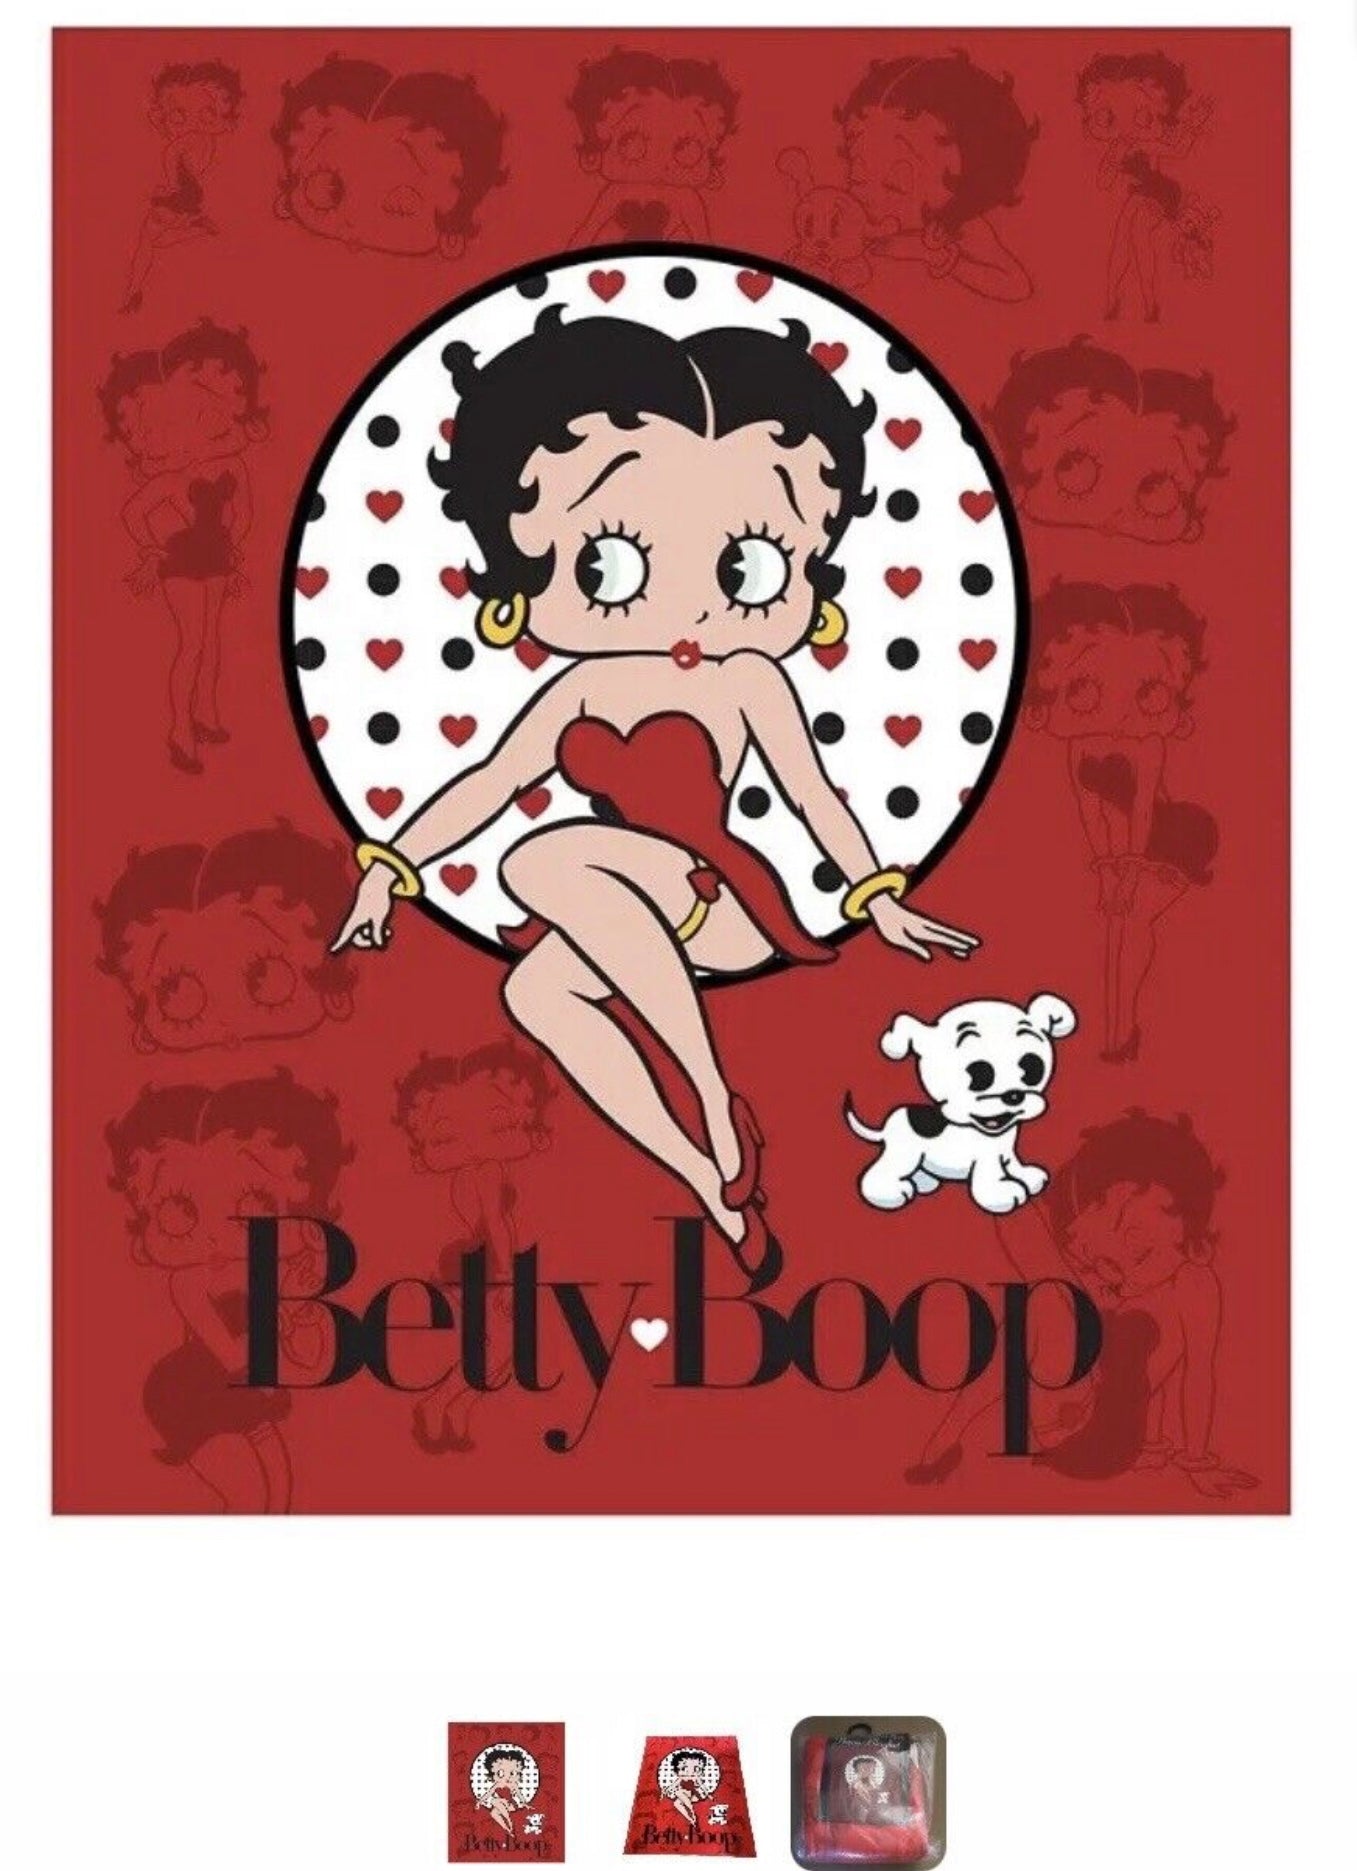 NEW RED BETTY BOOP SILHOUETTES PLUSH FLEECE THROW GIFT BLANKED BB6402